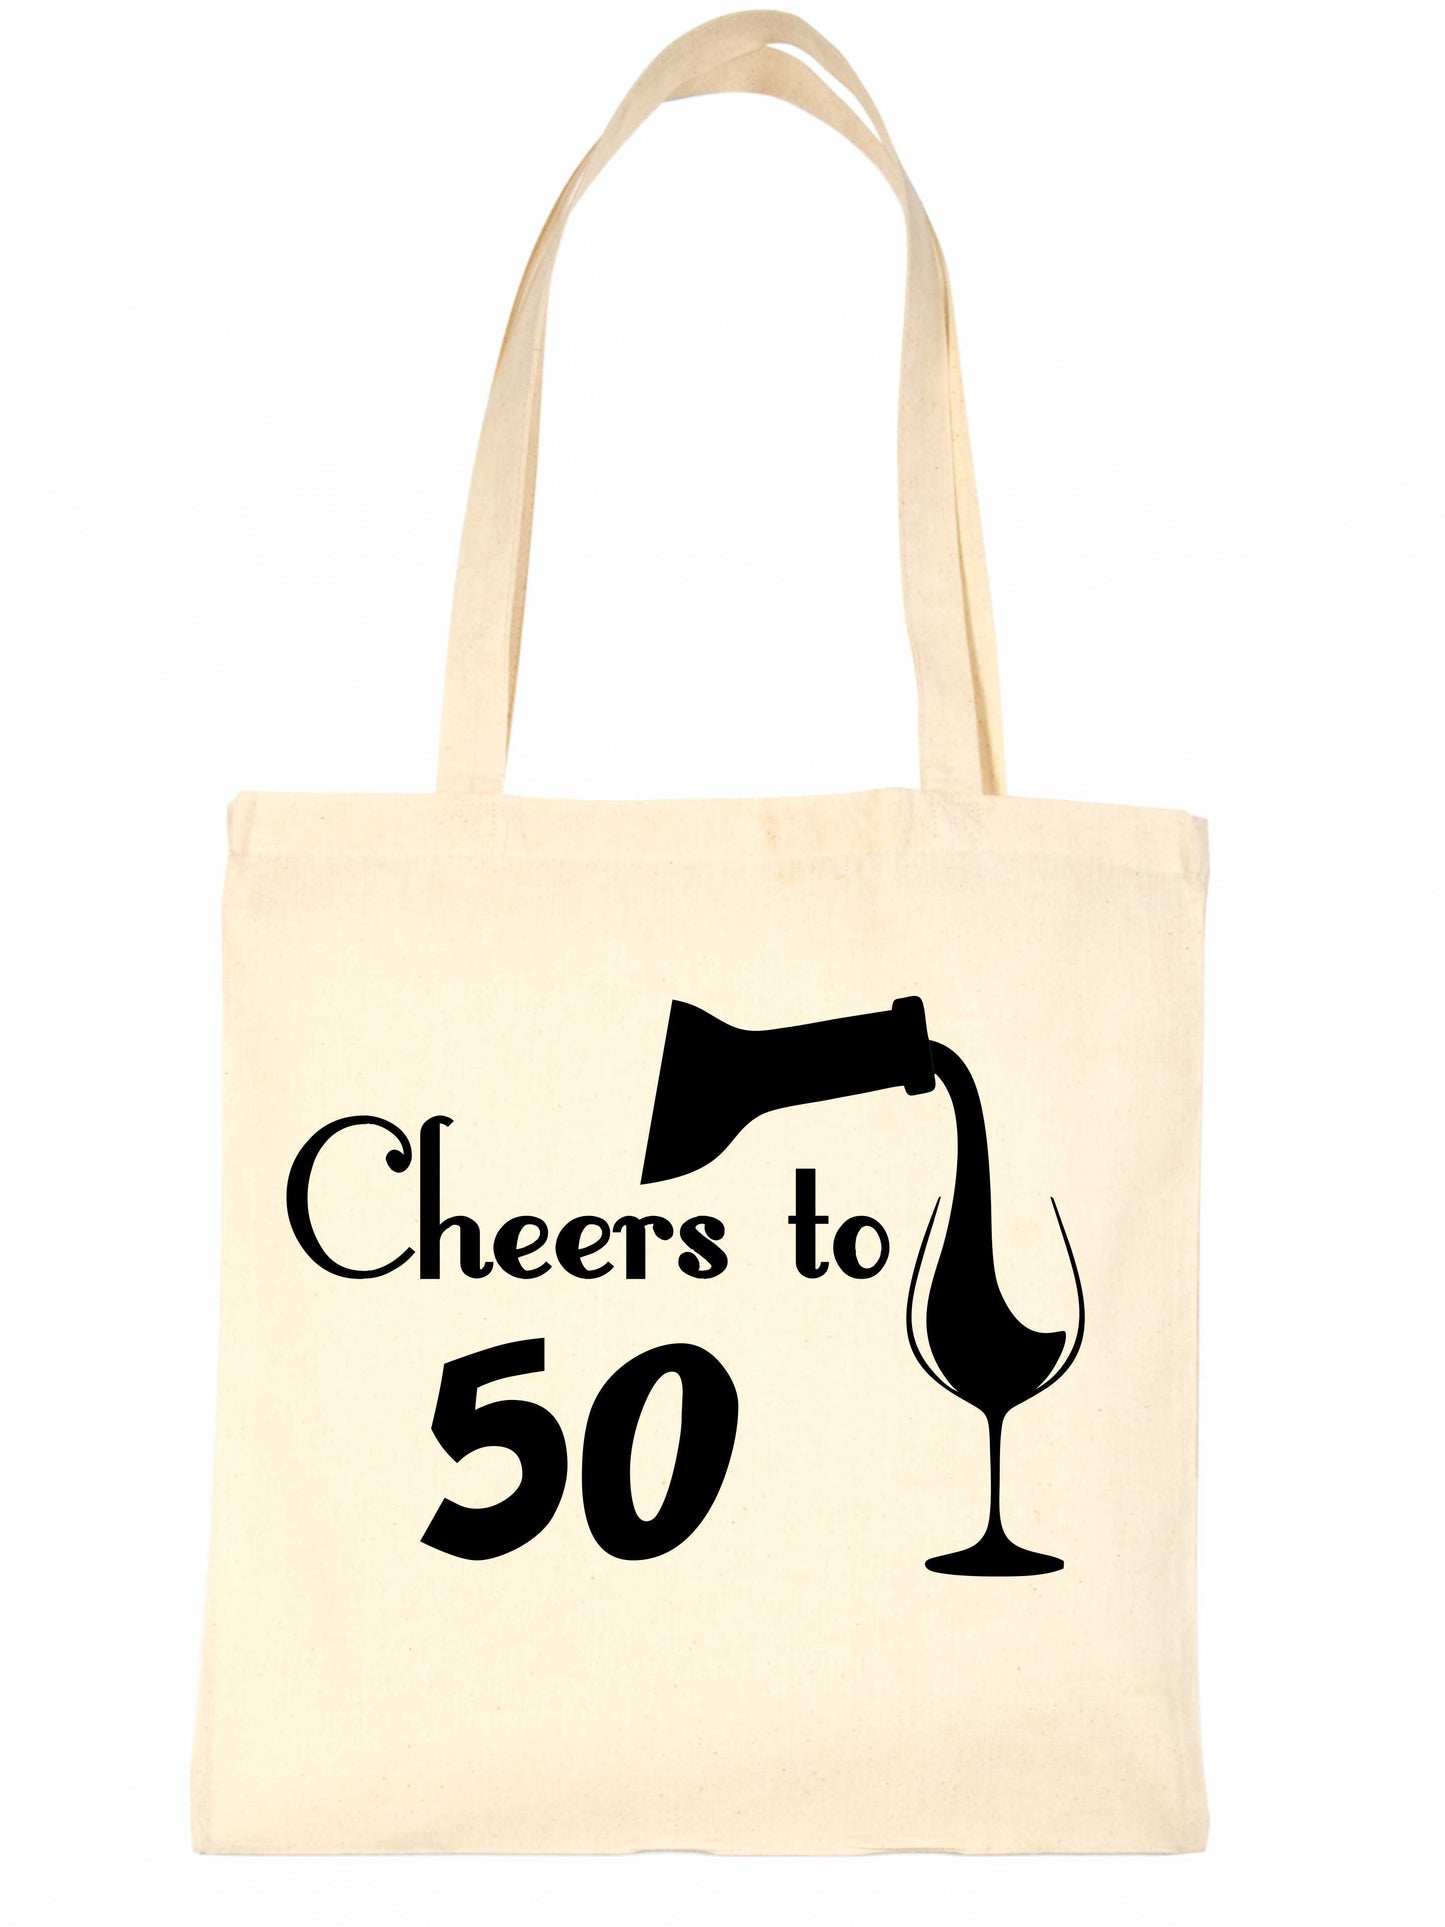 Cheers to Being 50 Birthday Gift For 50 Year Old Reusable Shopping Tote Bag